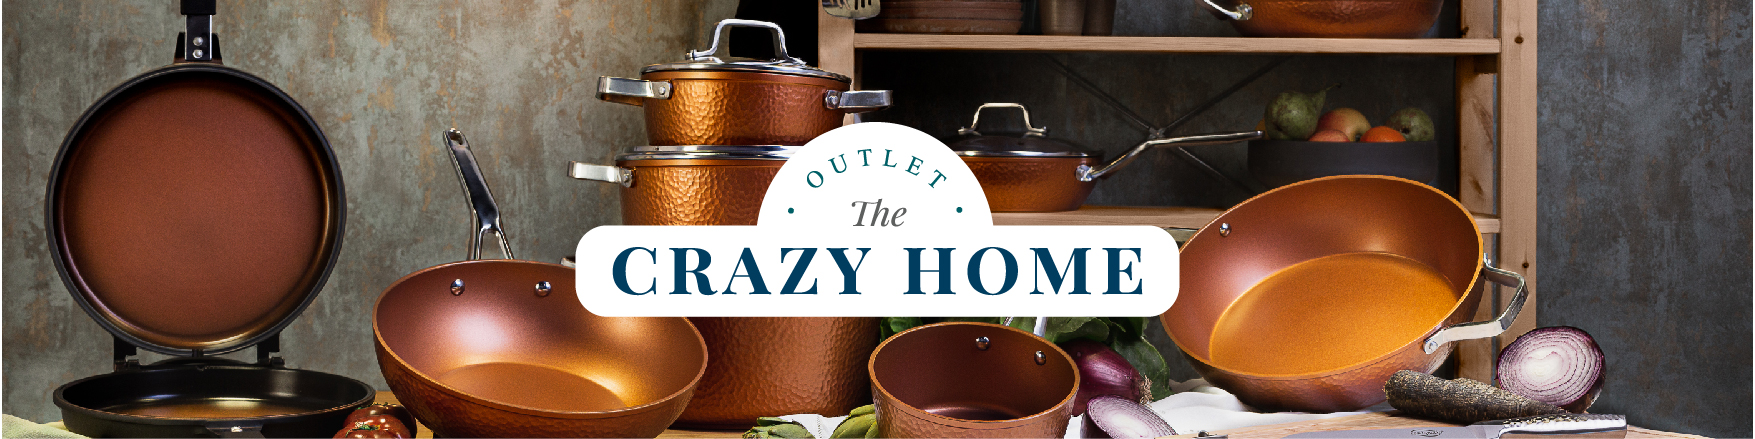 The Crazy Home Outlet